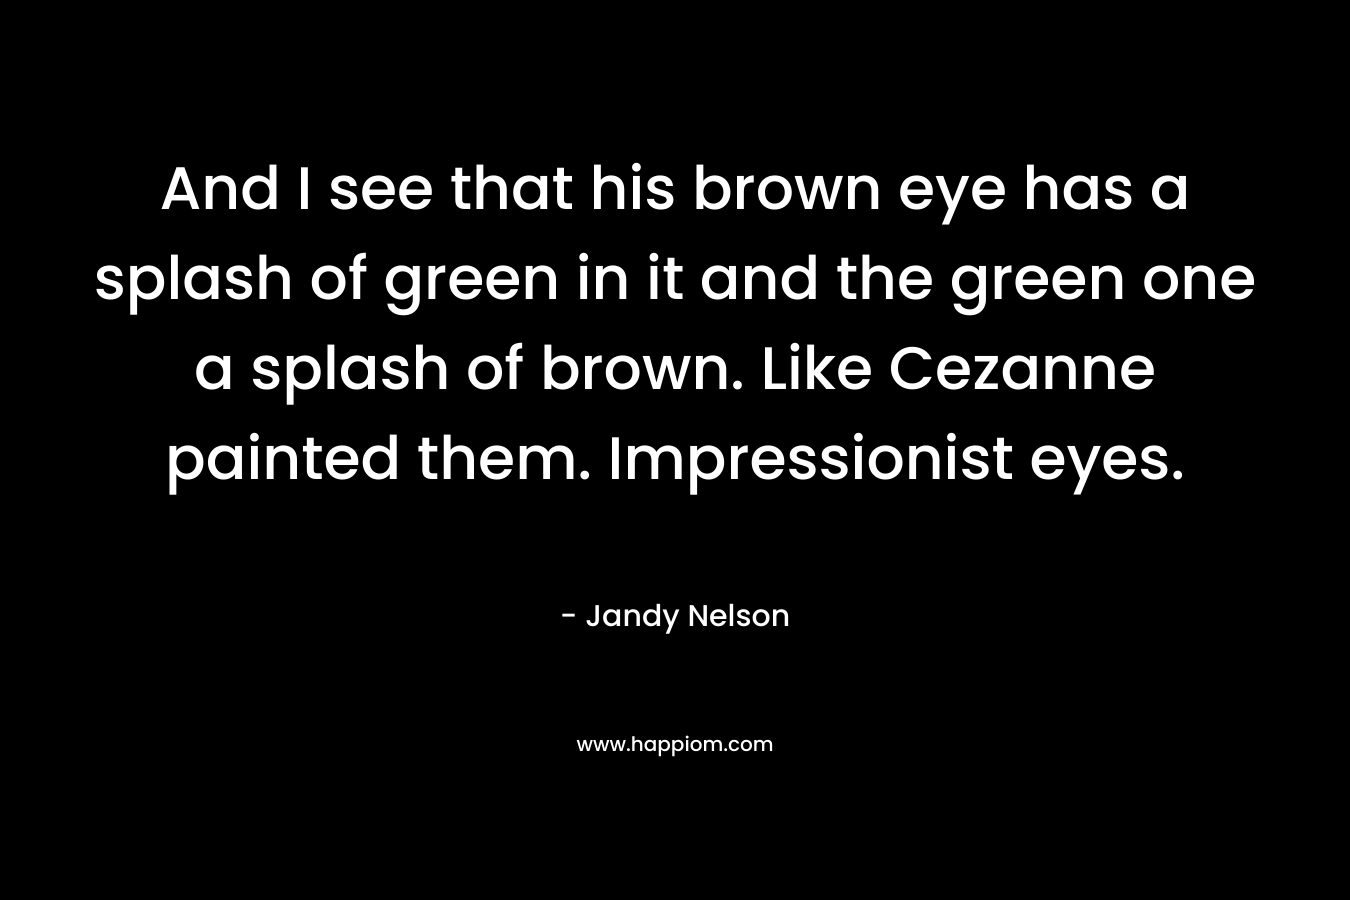 And I see that his brown eye has a splash of green in it and the green one a splash of brown. Like Cezanne painted them. Impressionist eyes.